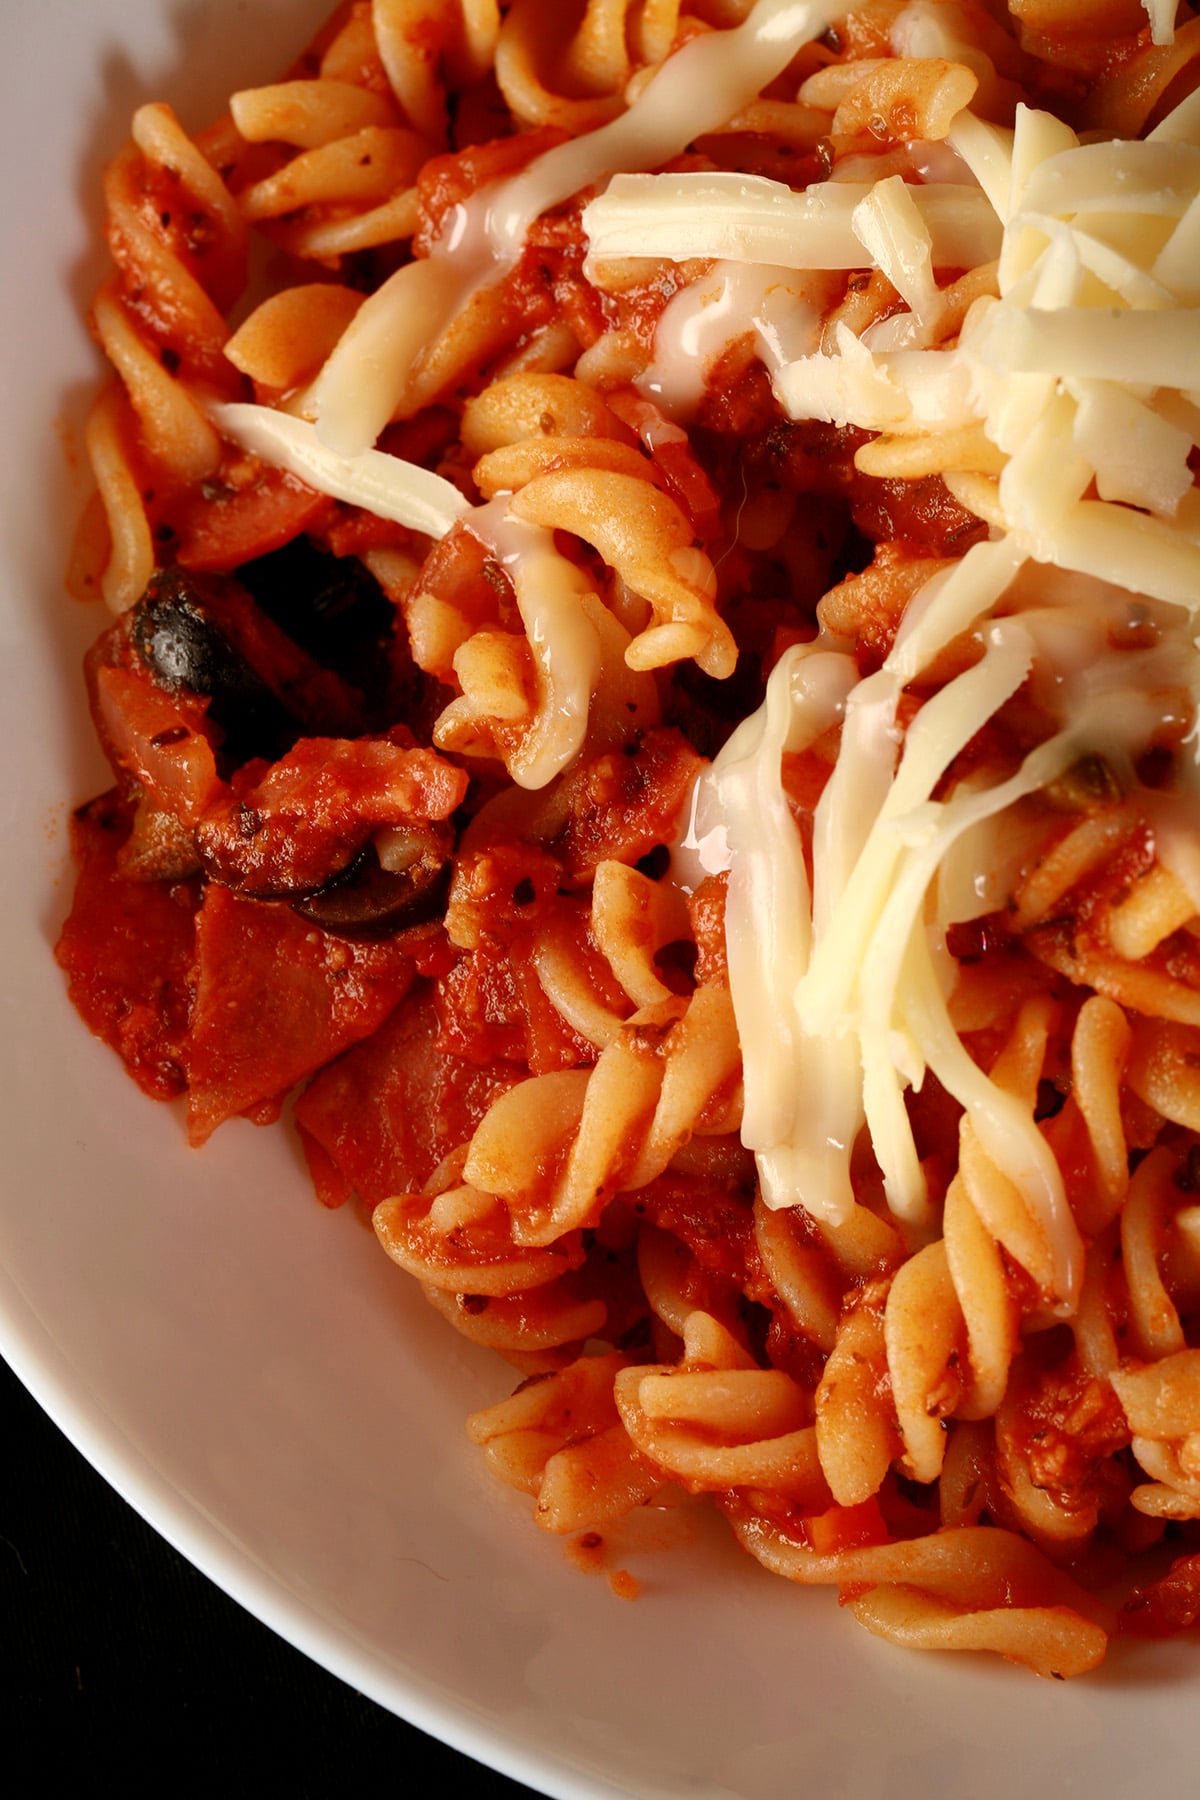 A bowl of pasta in red sauce, with bits of pepperoni and sliced black olives visible. There is shredded mozzarella on top - Pasta Alla Porters.